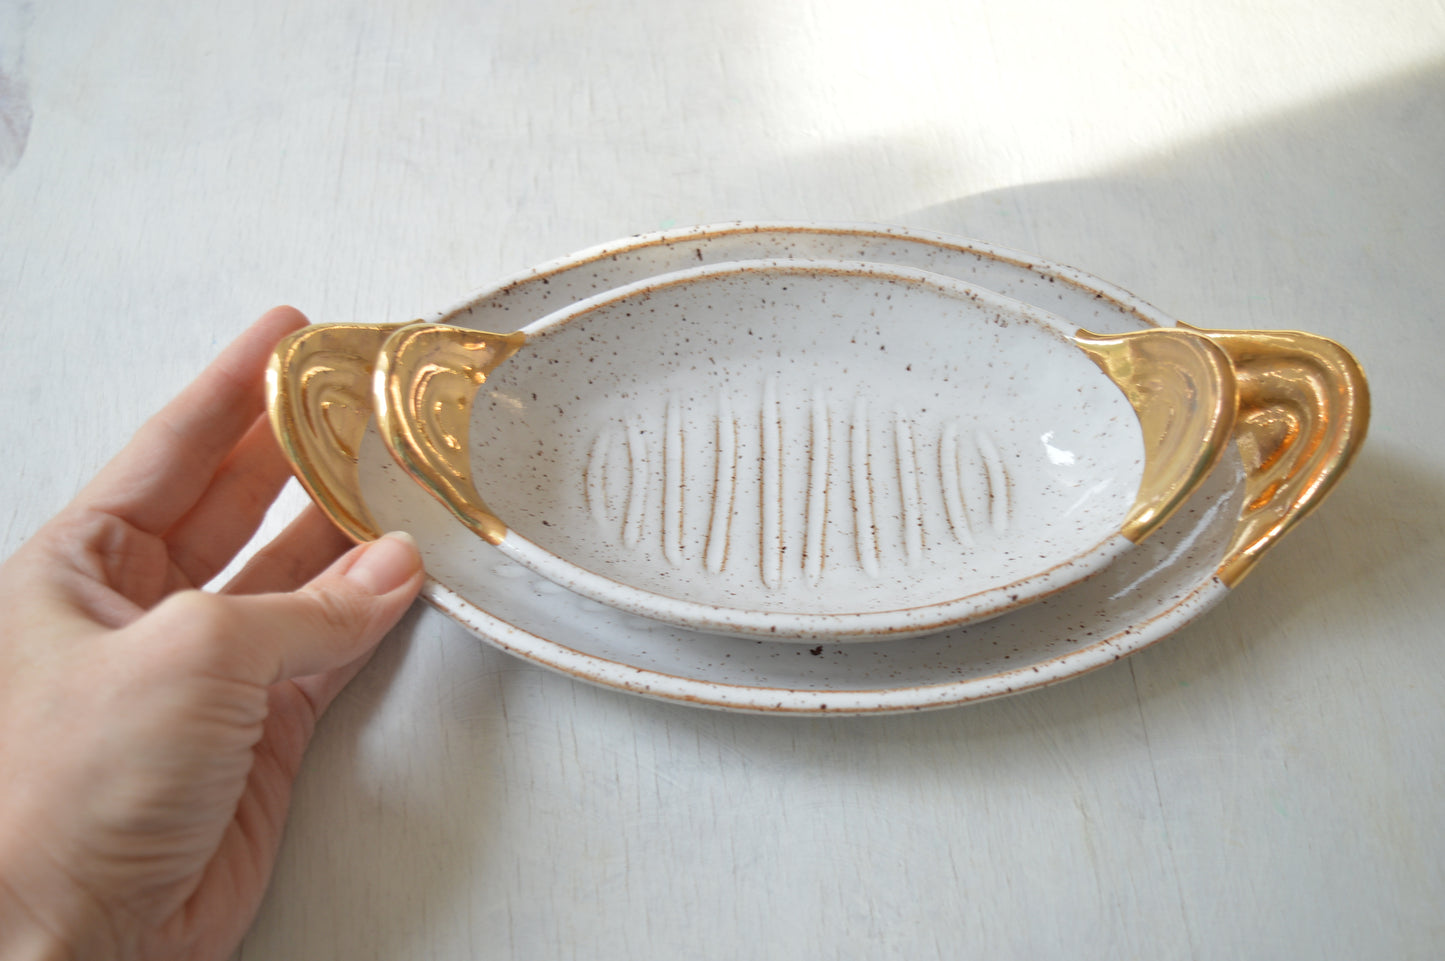 Serving platter with gold handles - small